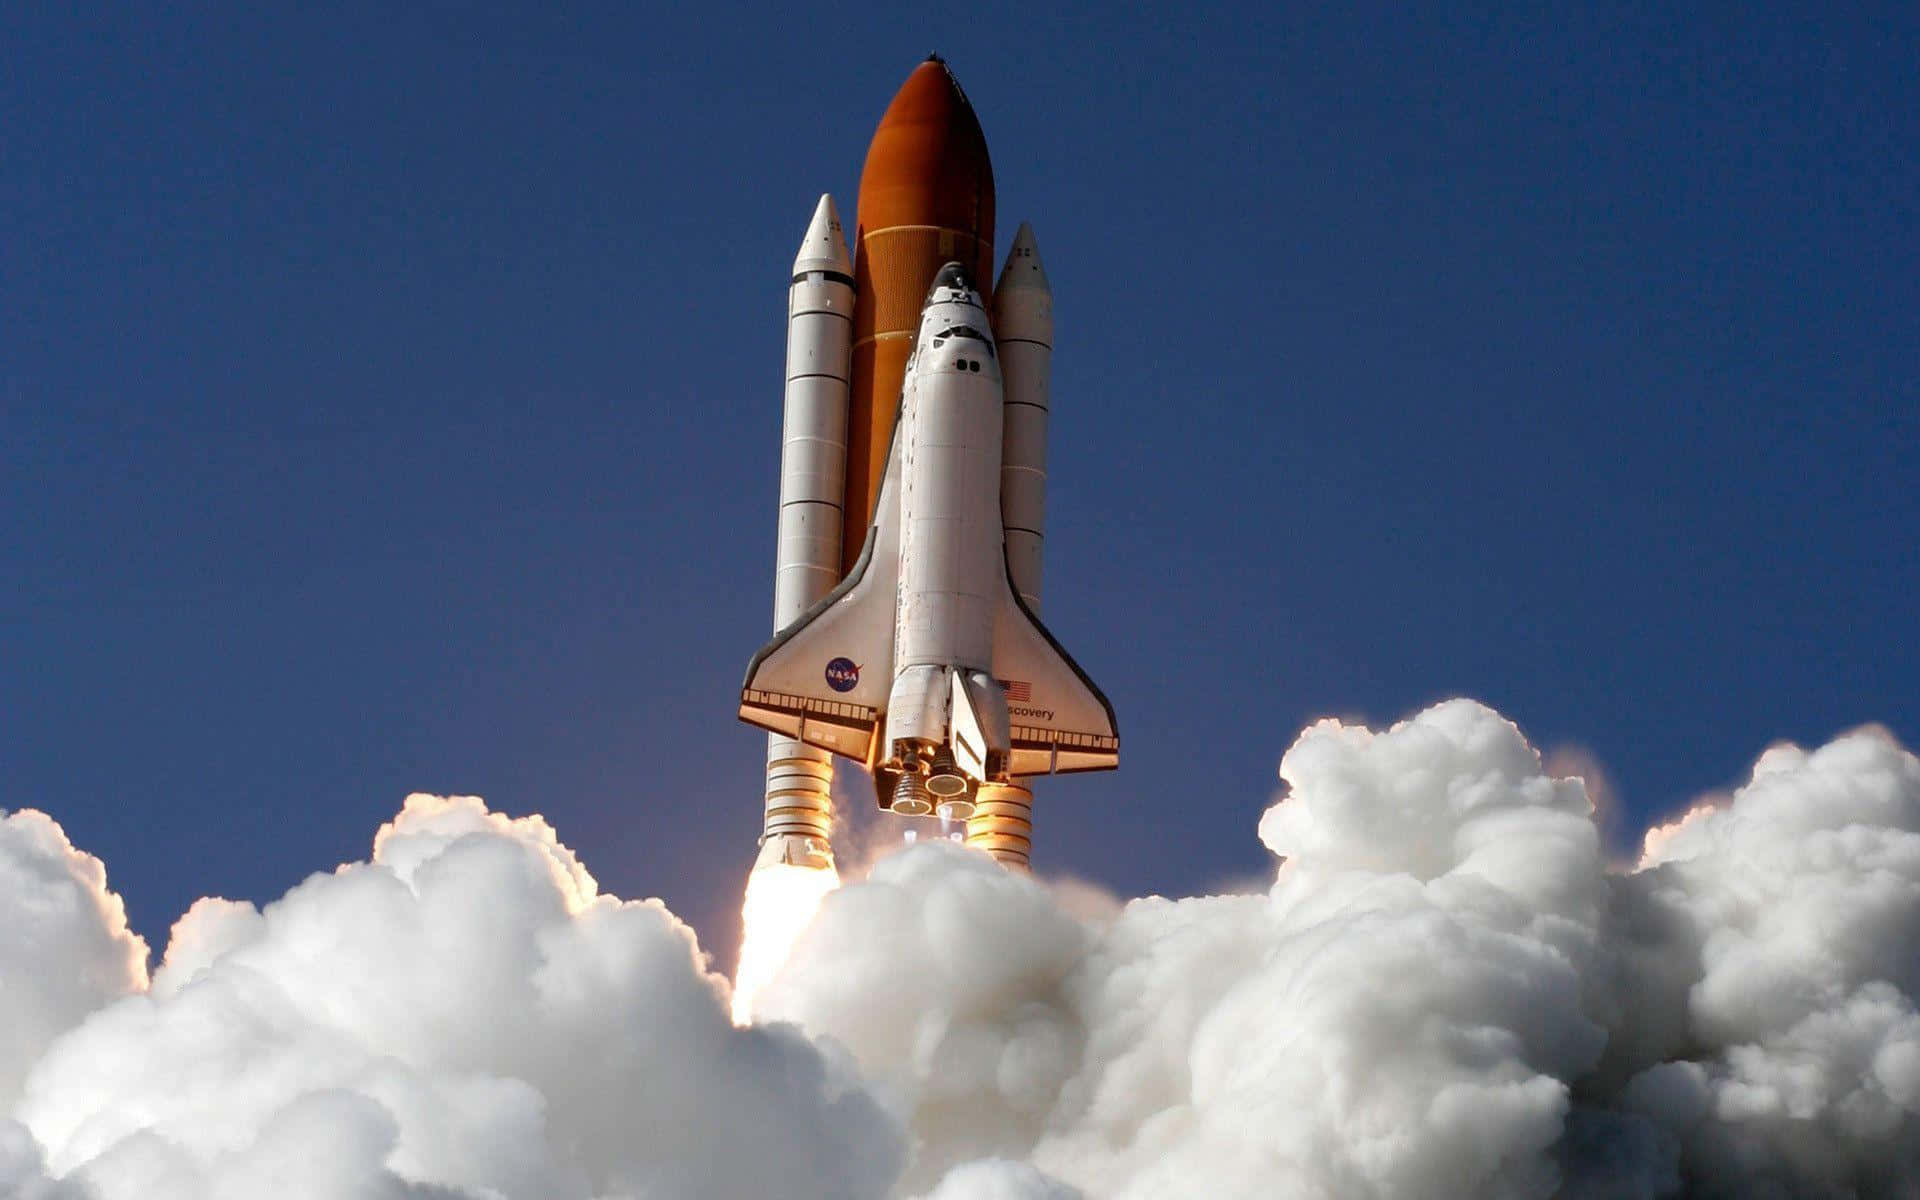 “The space shuttle Discovery flies through the sky in a bright and sunny day” Wallpaper